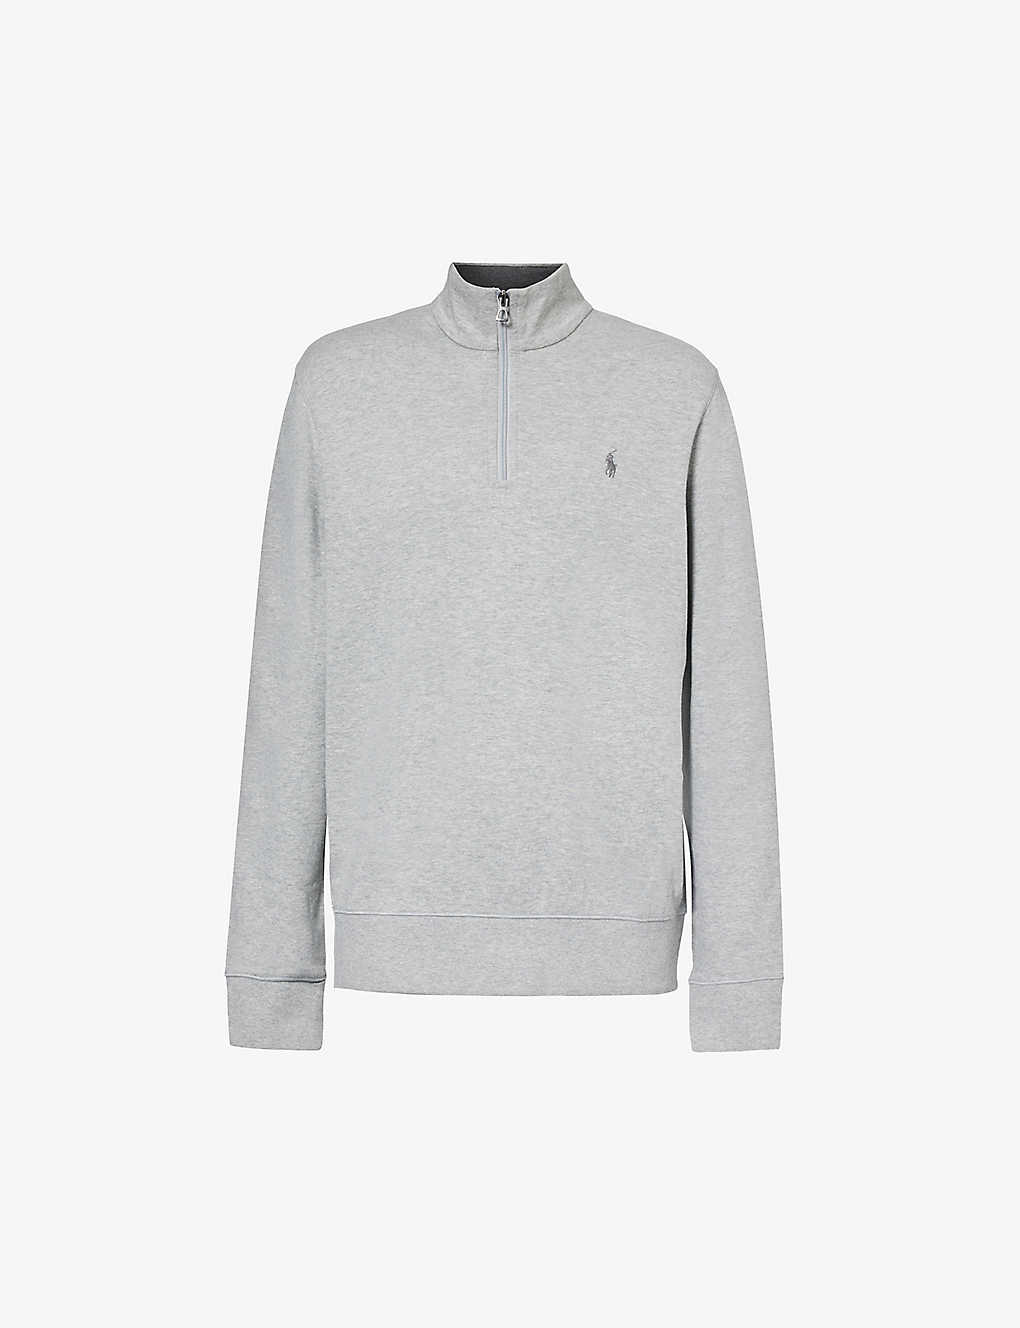 Polo Ralph Lauren Brand-embroidered Funnel-neck Cotton-blend Sweatshirt In Andover Heather